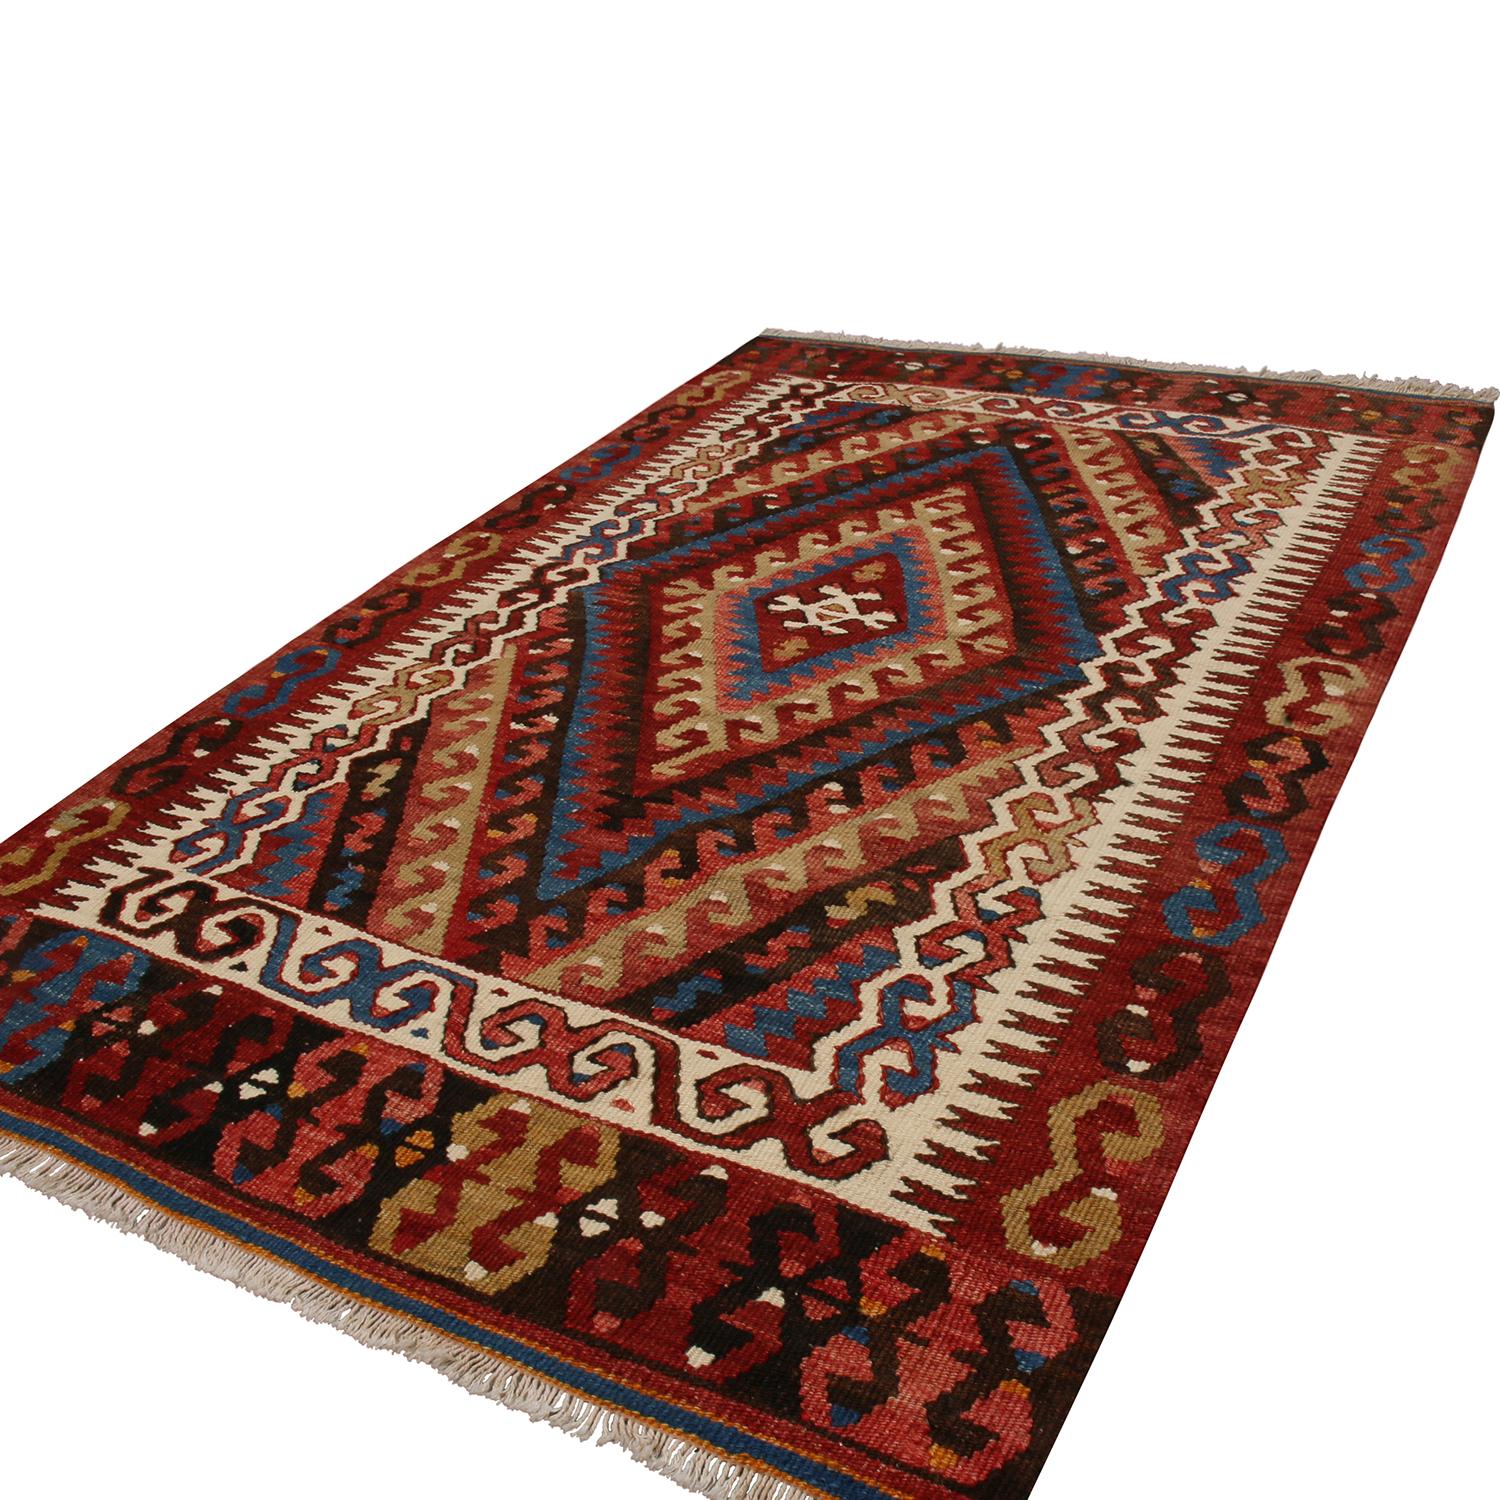 Flat-woven in high-quality wool originating from Turkey between 1940-1950, this vintage Fetiye wool Kilim rug enjoys a unique innermost beige-brown border, lending dimensionality to the rich and muted burgundy, navy blue, black, green, and orange